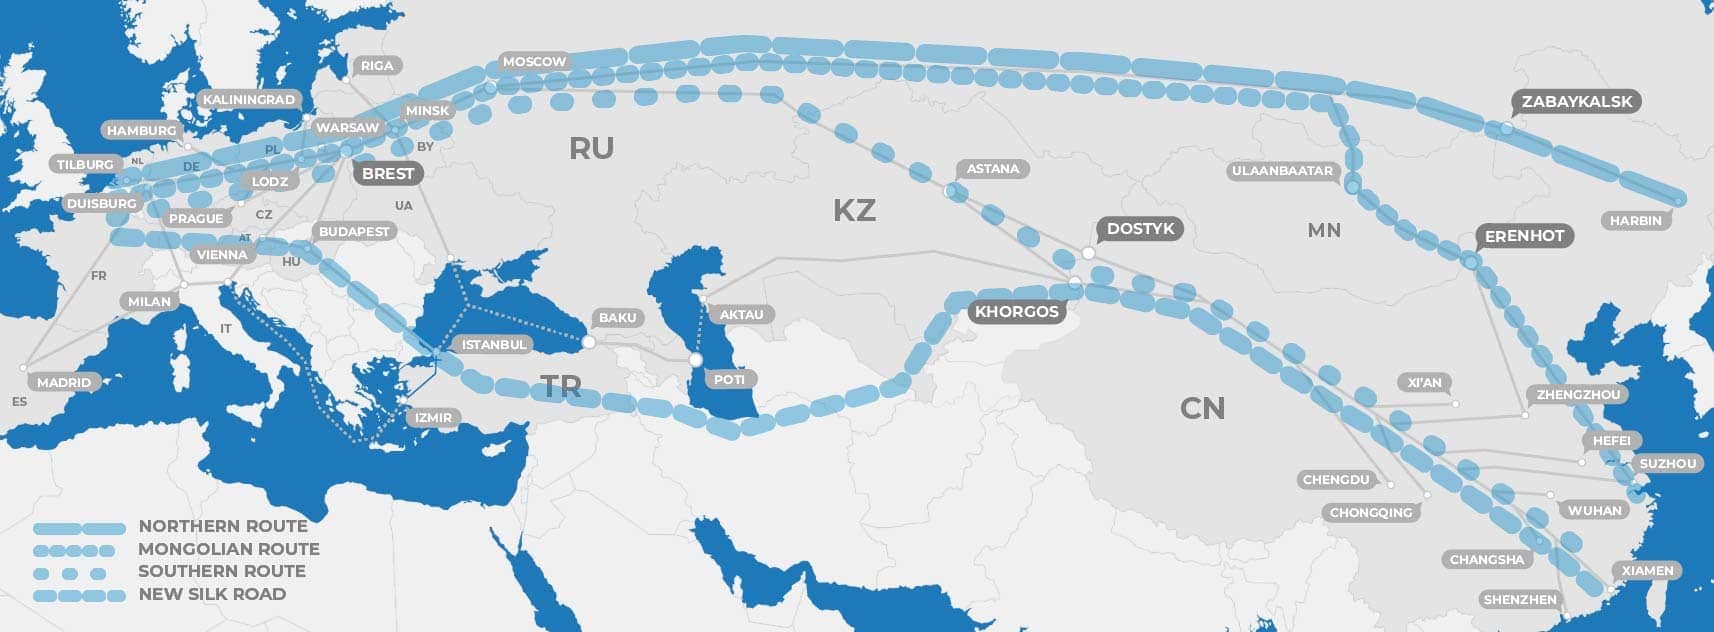 Map displaying four trans eurasian railway routes between China and Europe